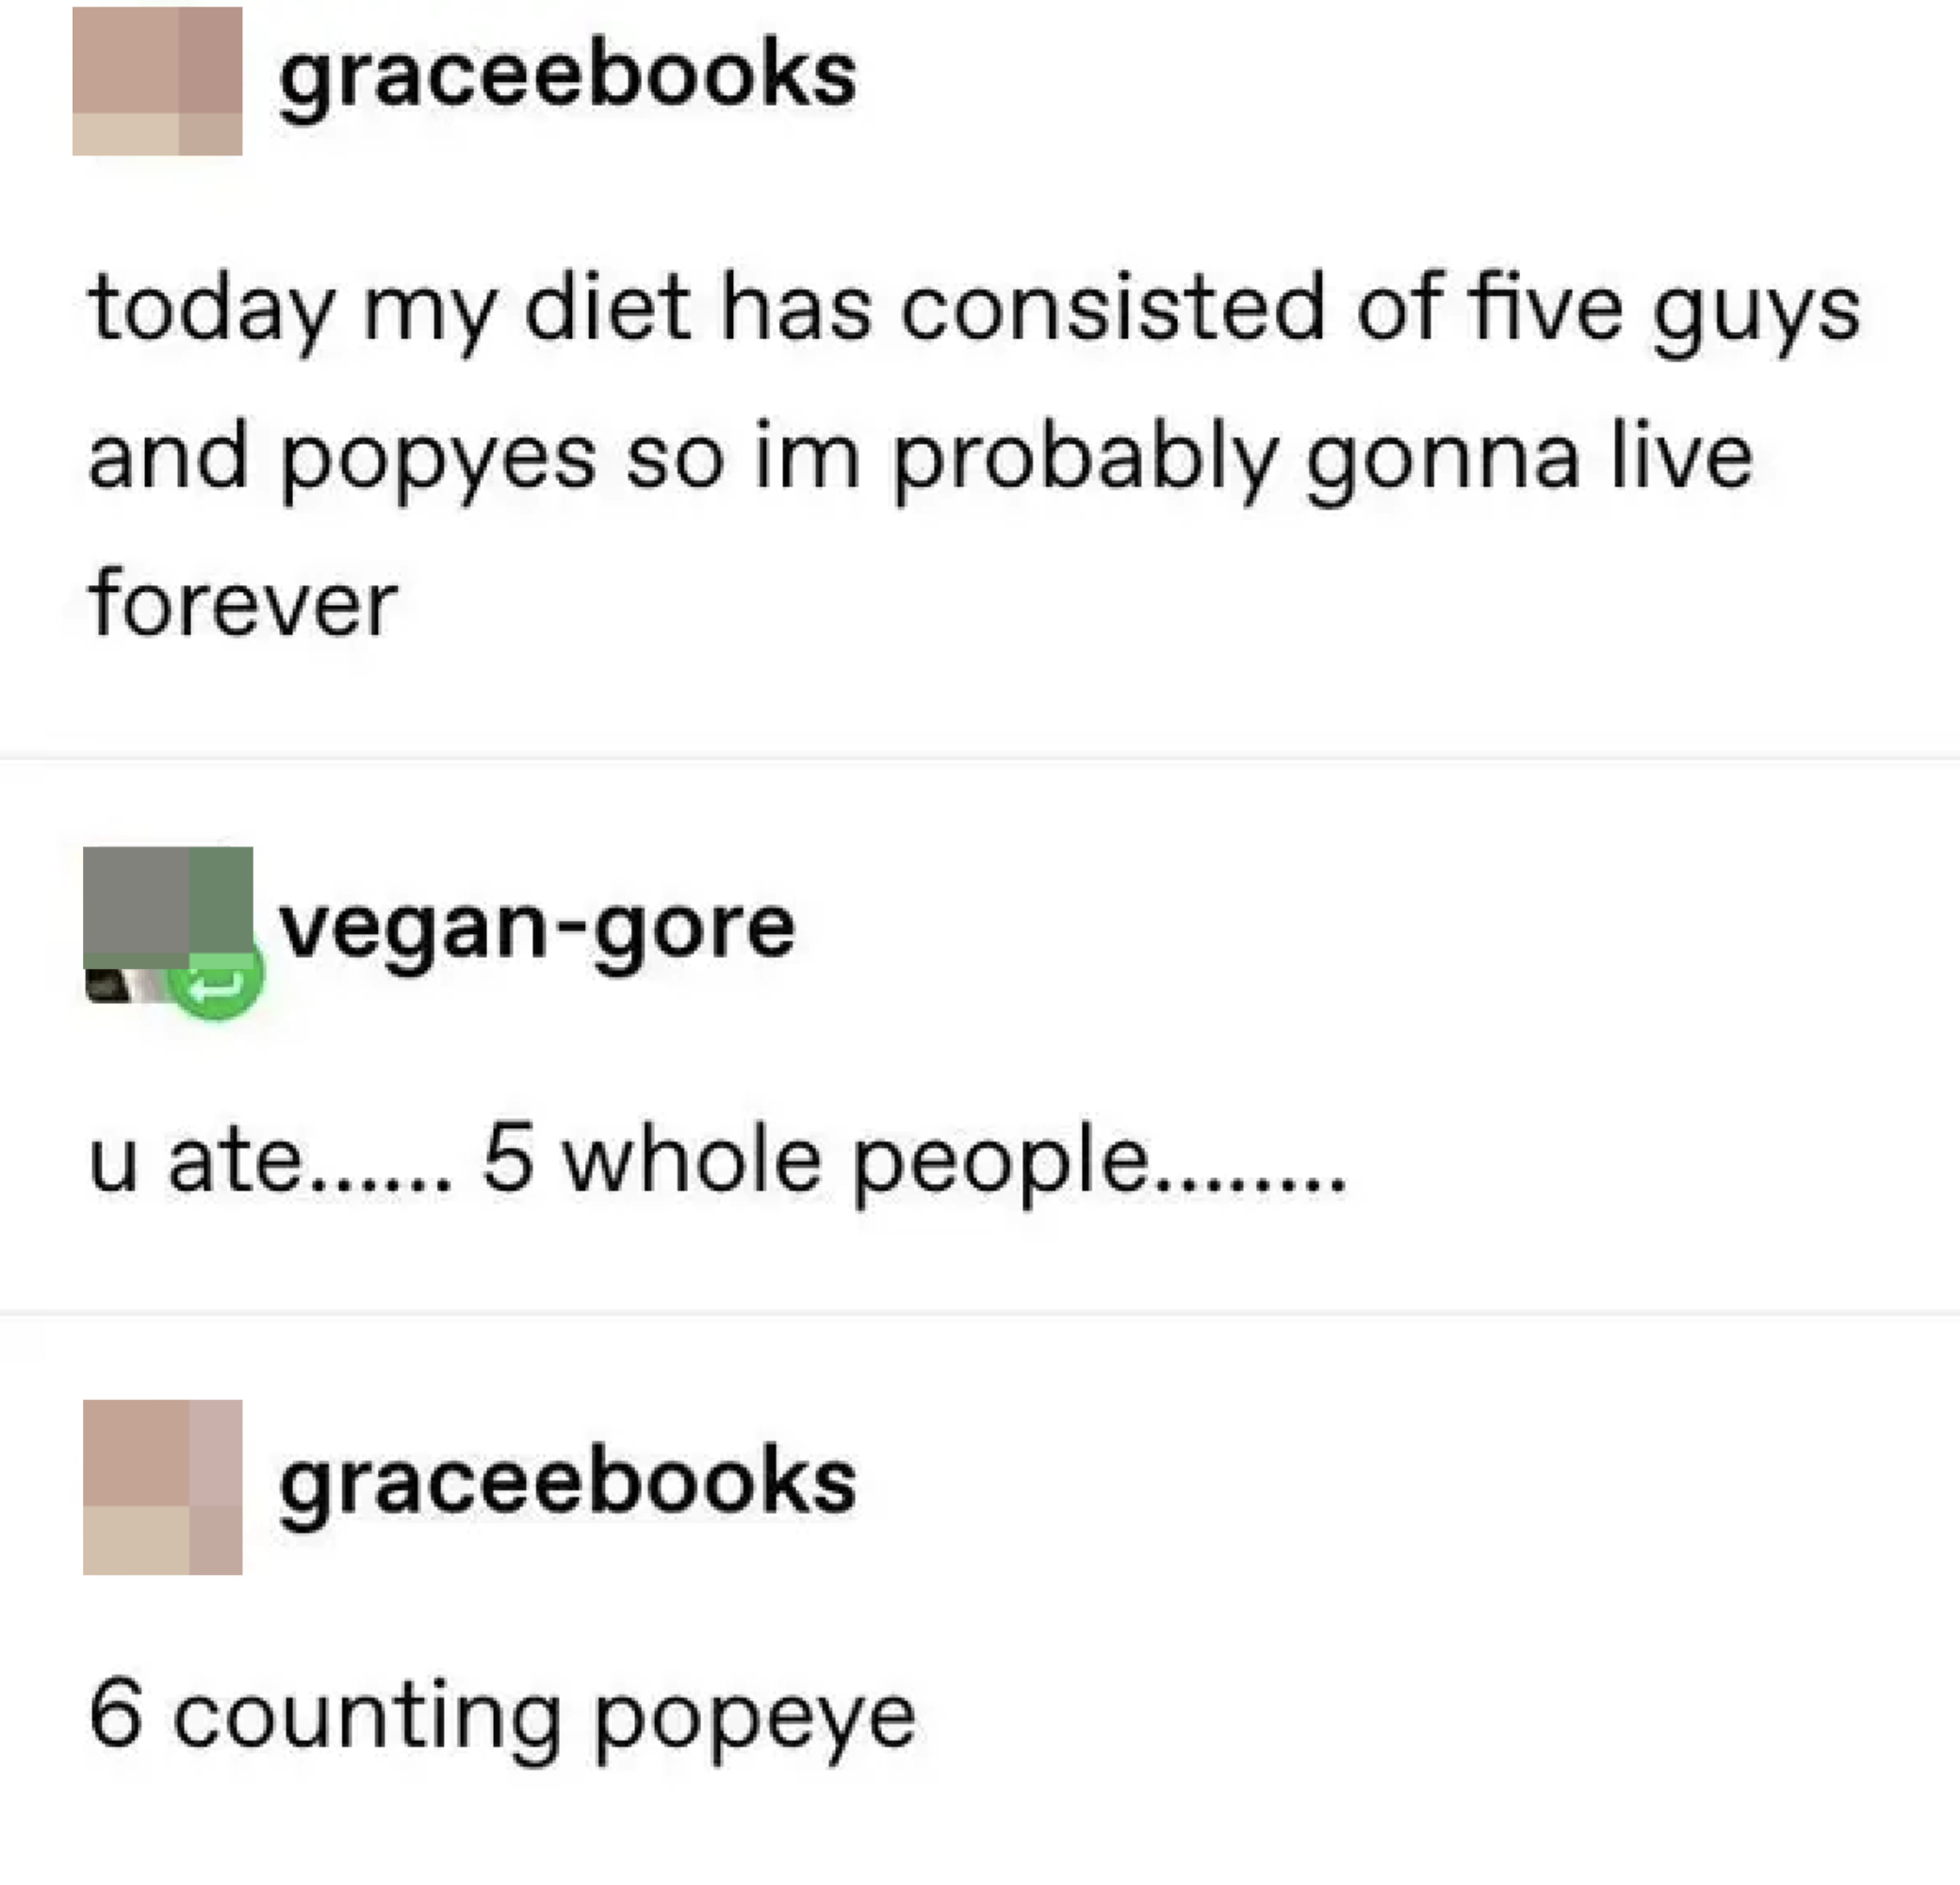 &quot;6 counting popeye&quot;